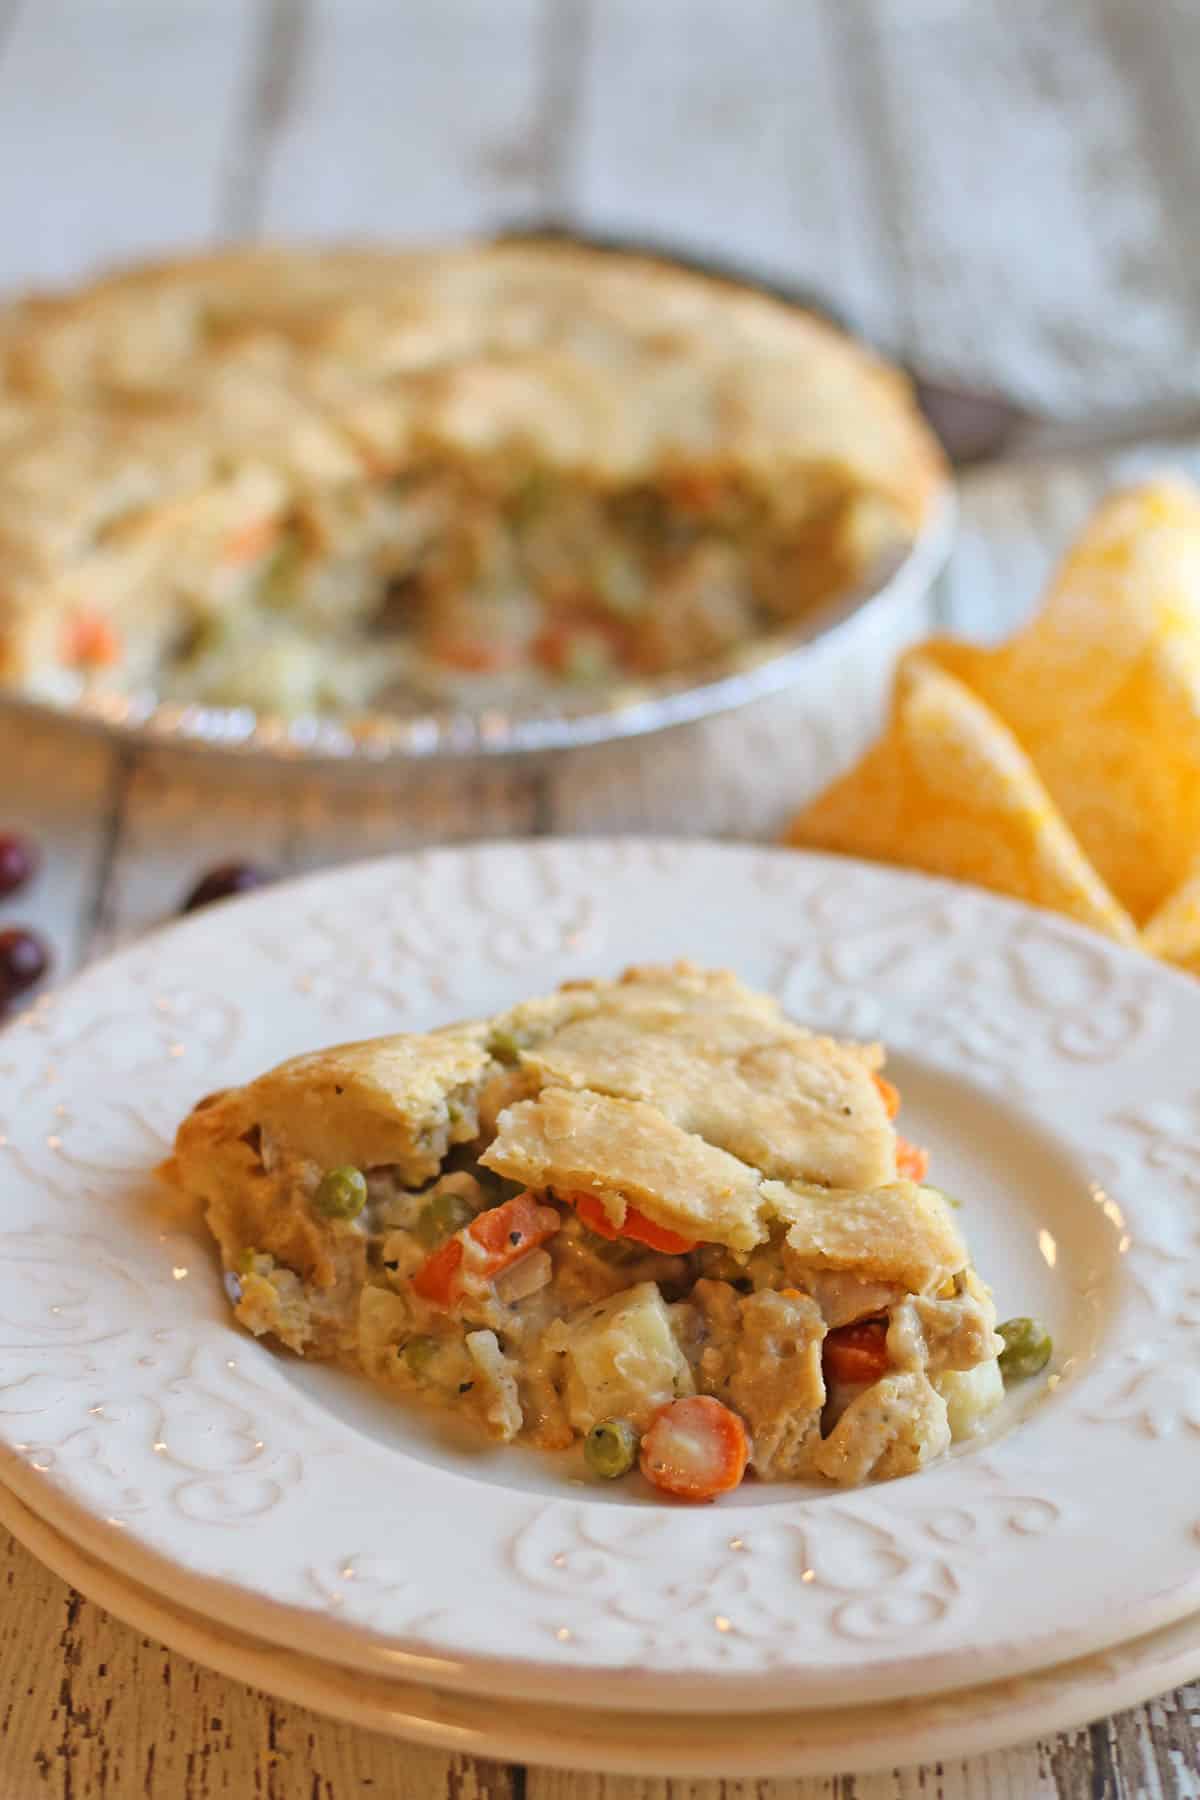 Slice of vegan chicken pot pie on table with whole pie.